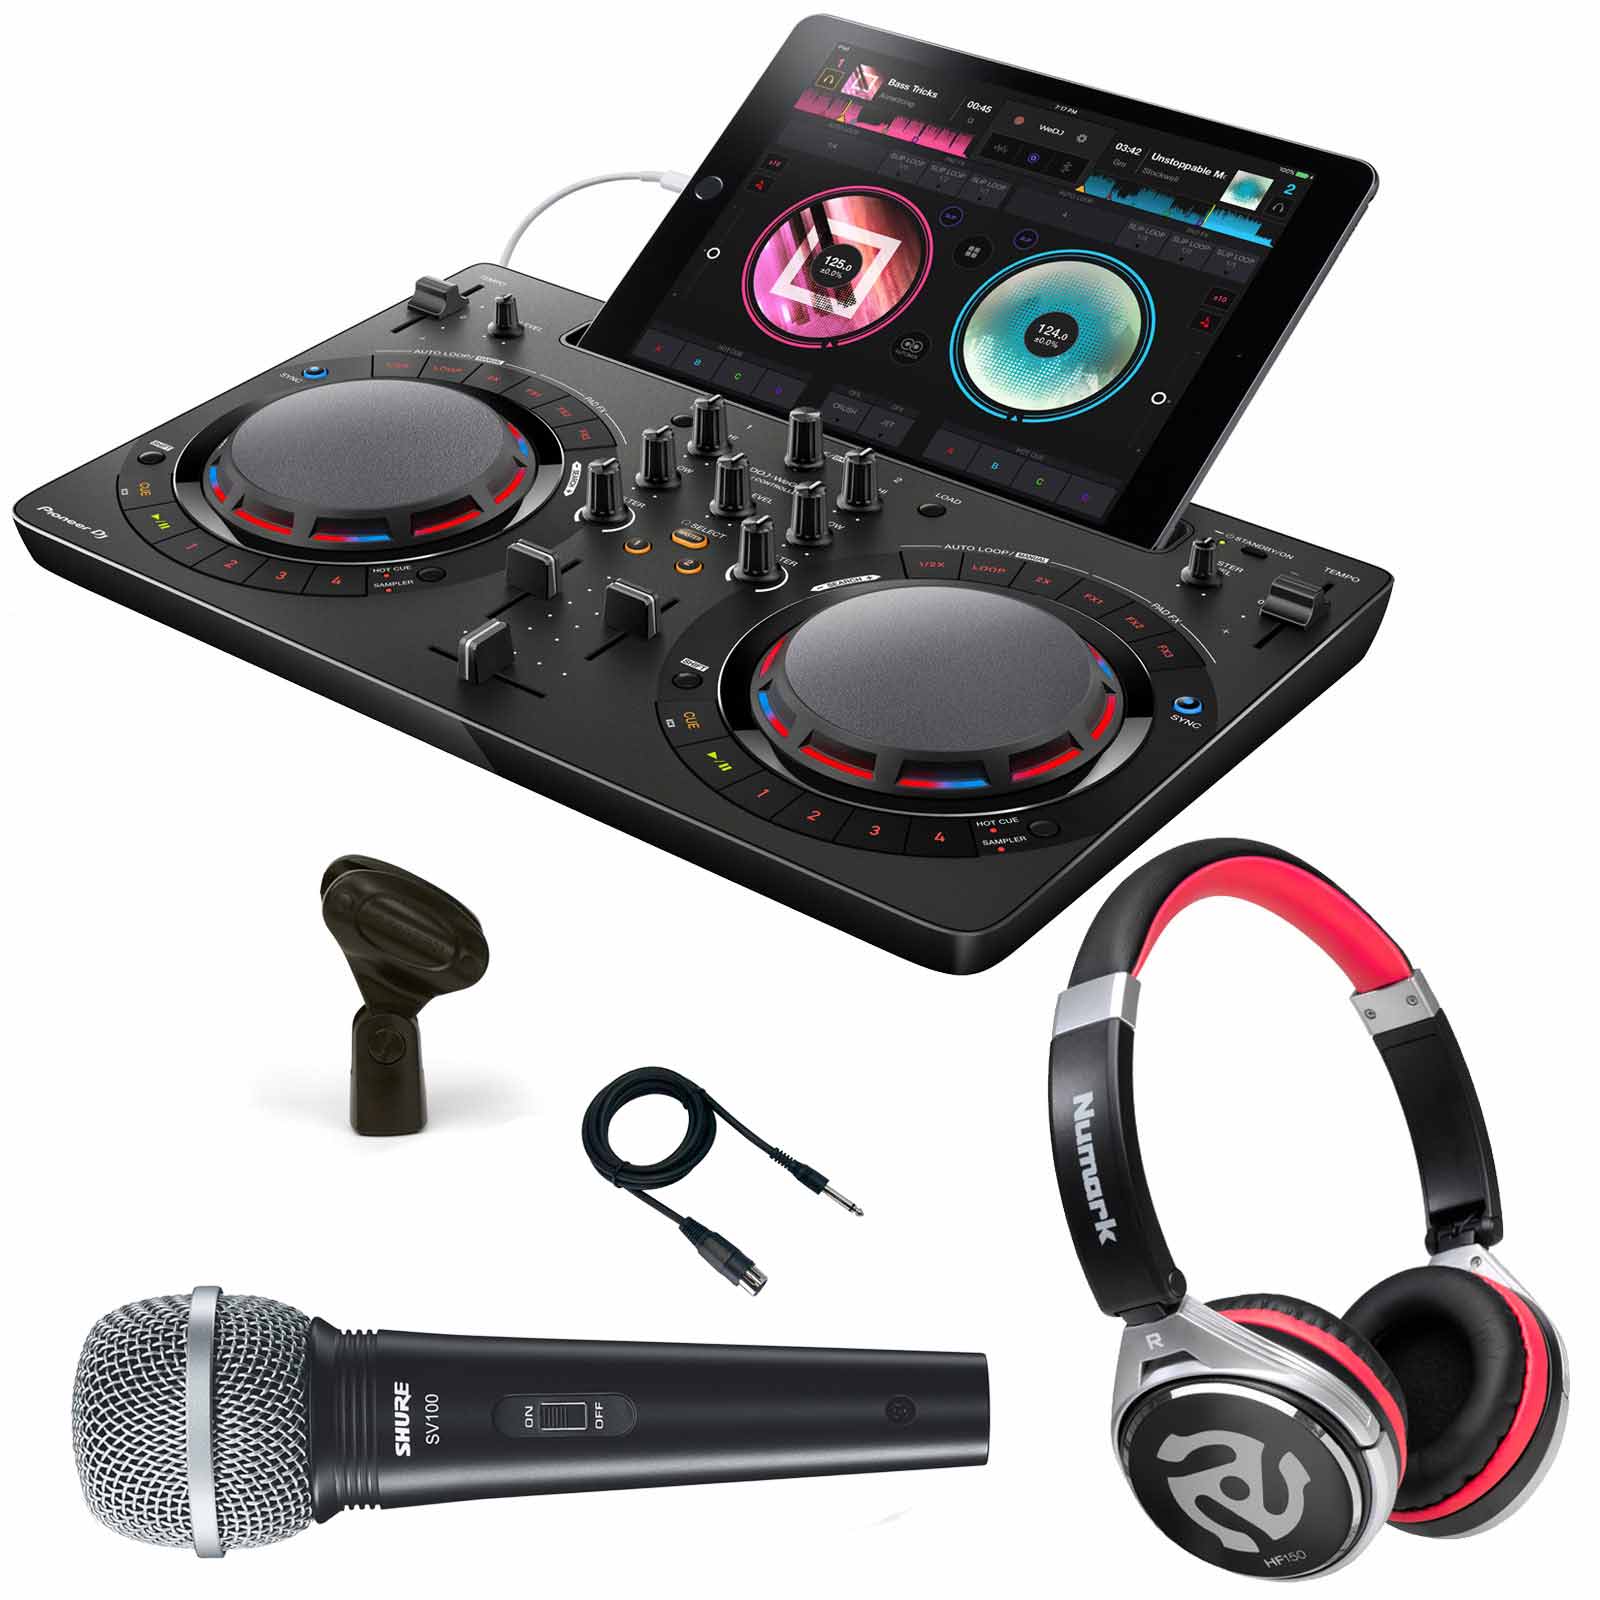 Djay pro how to listen on headphones for pc